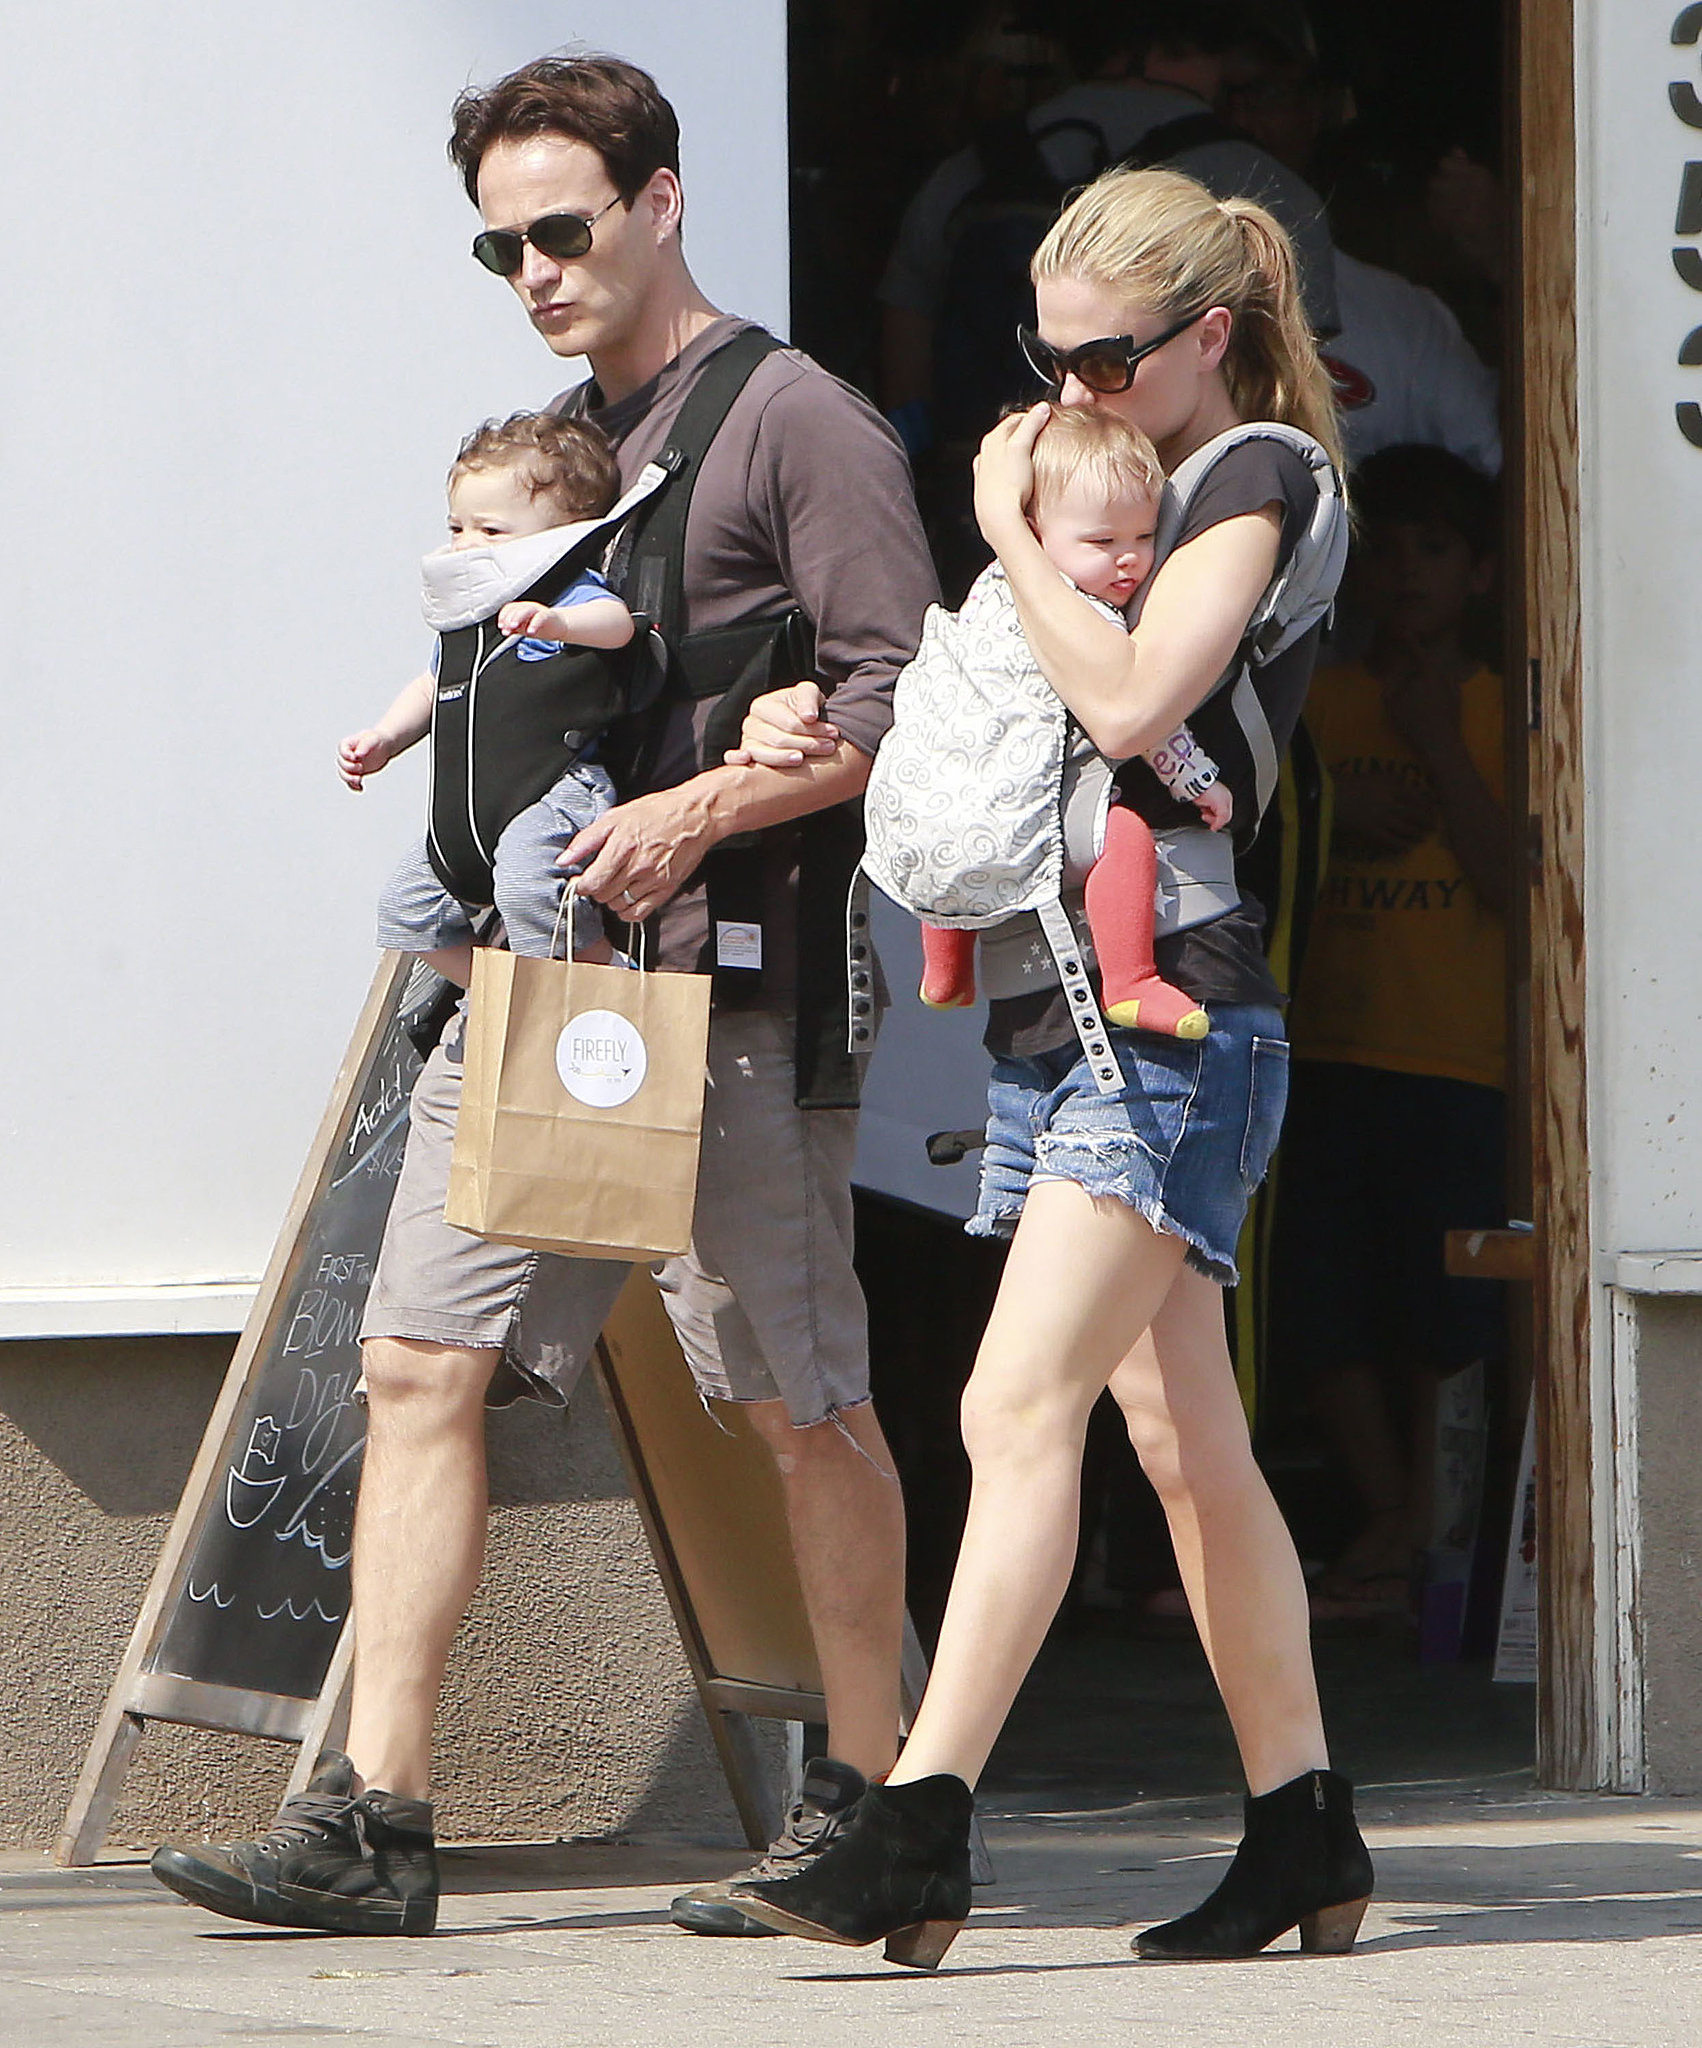 Anna Paquin and Stephen Moyer walked in LA's Venice neighborhood with